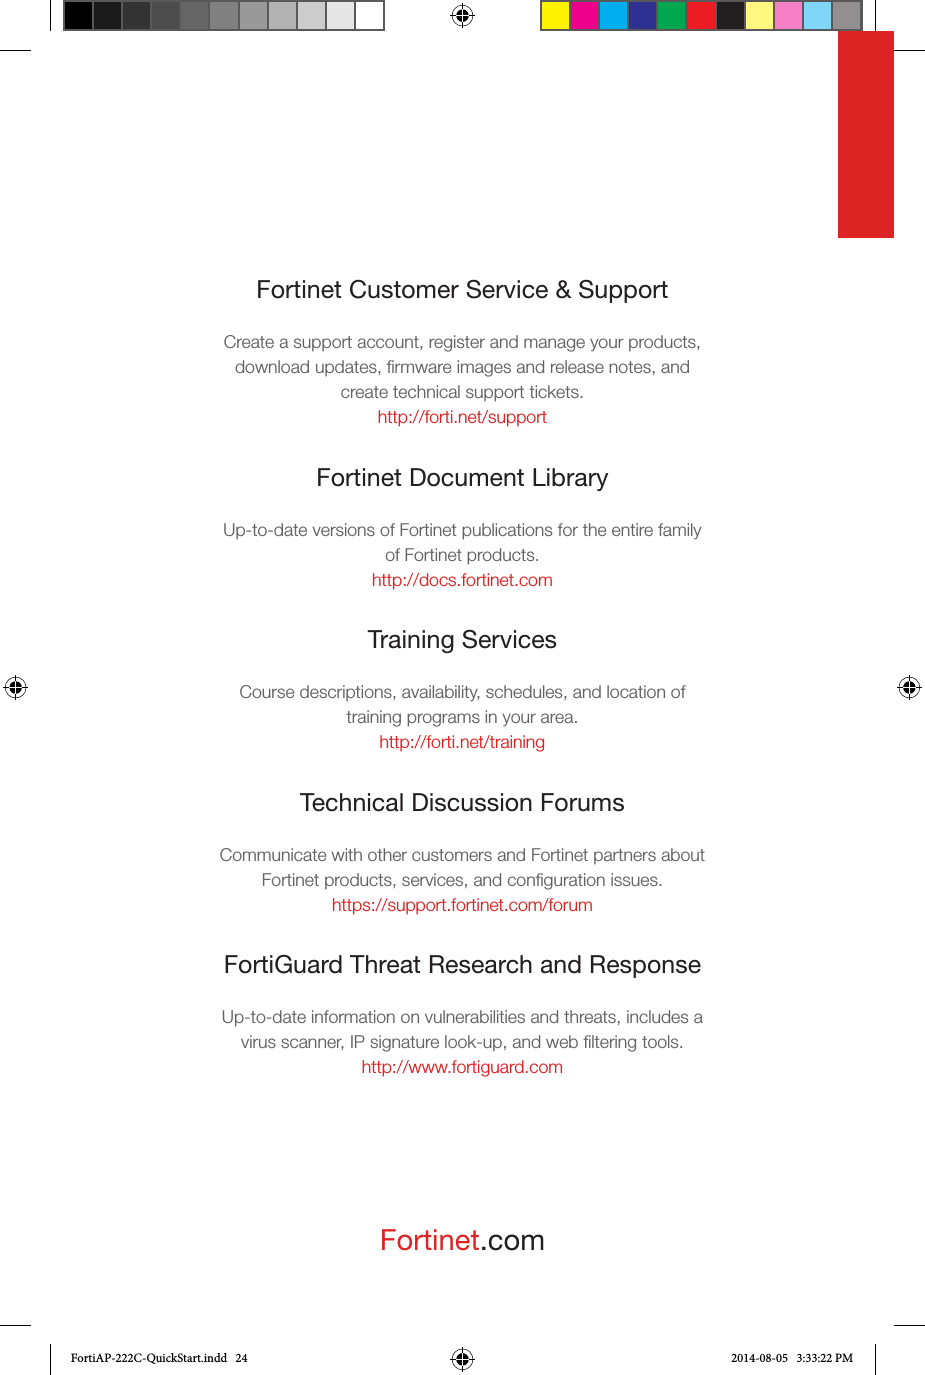 Fortinet.comFortinet Customer Service &amp; SupportCreate a support account, register and manage your products, download updates, ﬁrmware images and release notes, and create technical support tickets.http://forti.net/supportFortinet Document LibraryUp-to-date versions of Fortinet publications for the entire family of Fortinet products.http://docs.fortinet.comTraining ServicesCourse descriptions, availability, schedules, and location of training programs in your area.http://forti.net/trainingTechnical Discussion ForumsCommunicate with other customers and Fortinet partners about Fortinet products, services, and conﬁguration issues.https://support.fortinet.com/forumFortiGuard Threat Research and ResponseUp-to-date information on vulnerabilities and threats, includes a virus scanner, IP signature look-up, and web ﬁltering tools.http://www.fortiguard.comFortiAP-222C-QuickStart.indd   24 2014-08-05   3:33:22 PM